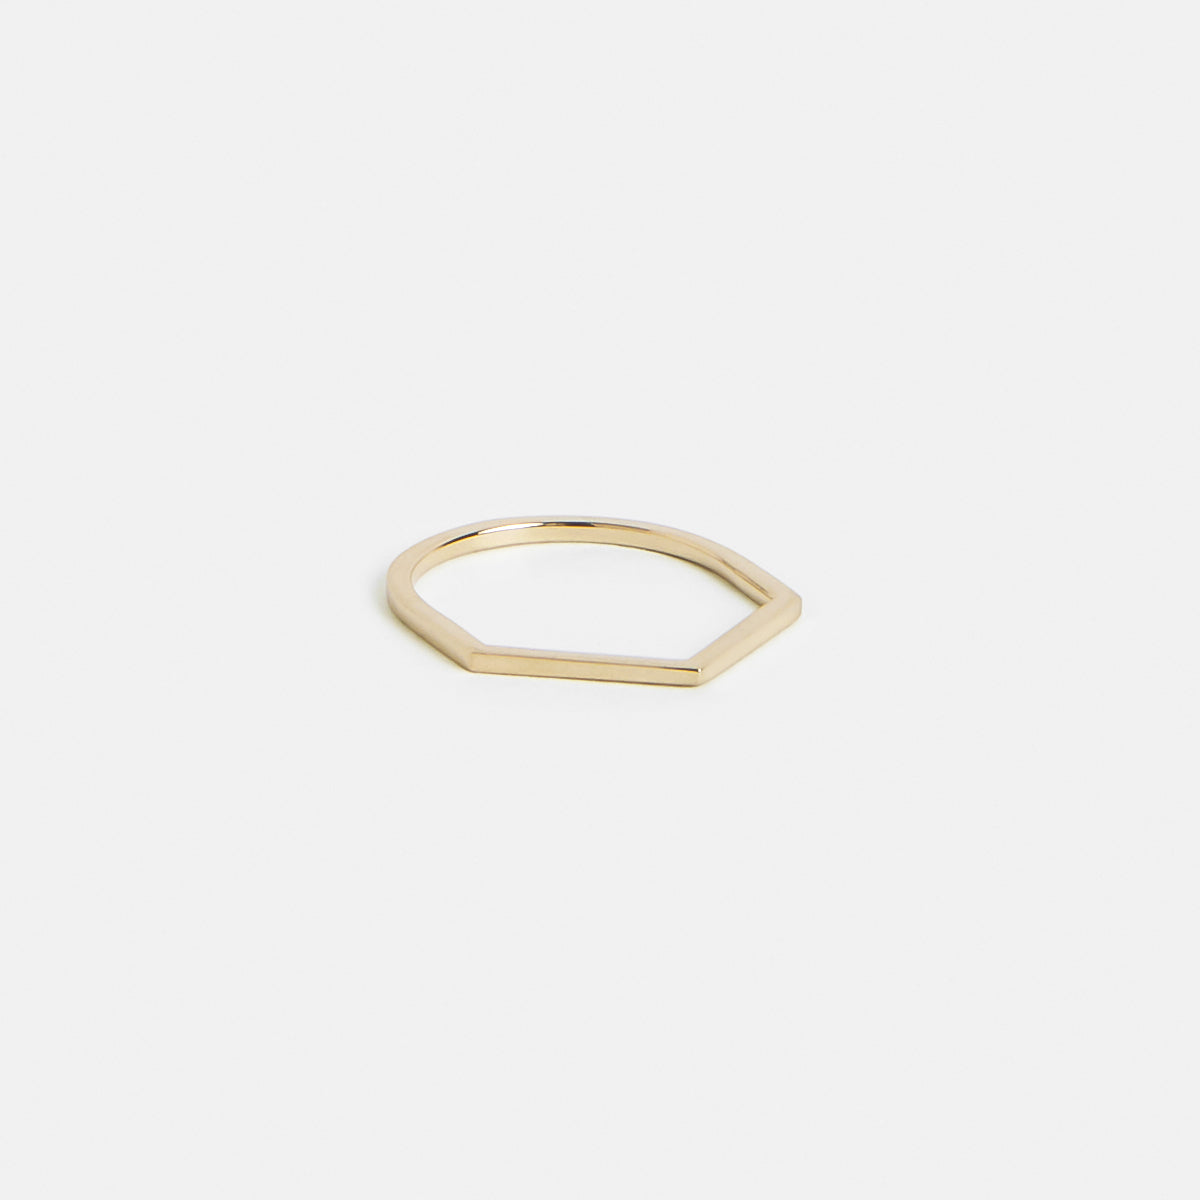 Namas Unisex Ring in 14k Gold by SHW Fine Jewelry NYC